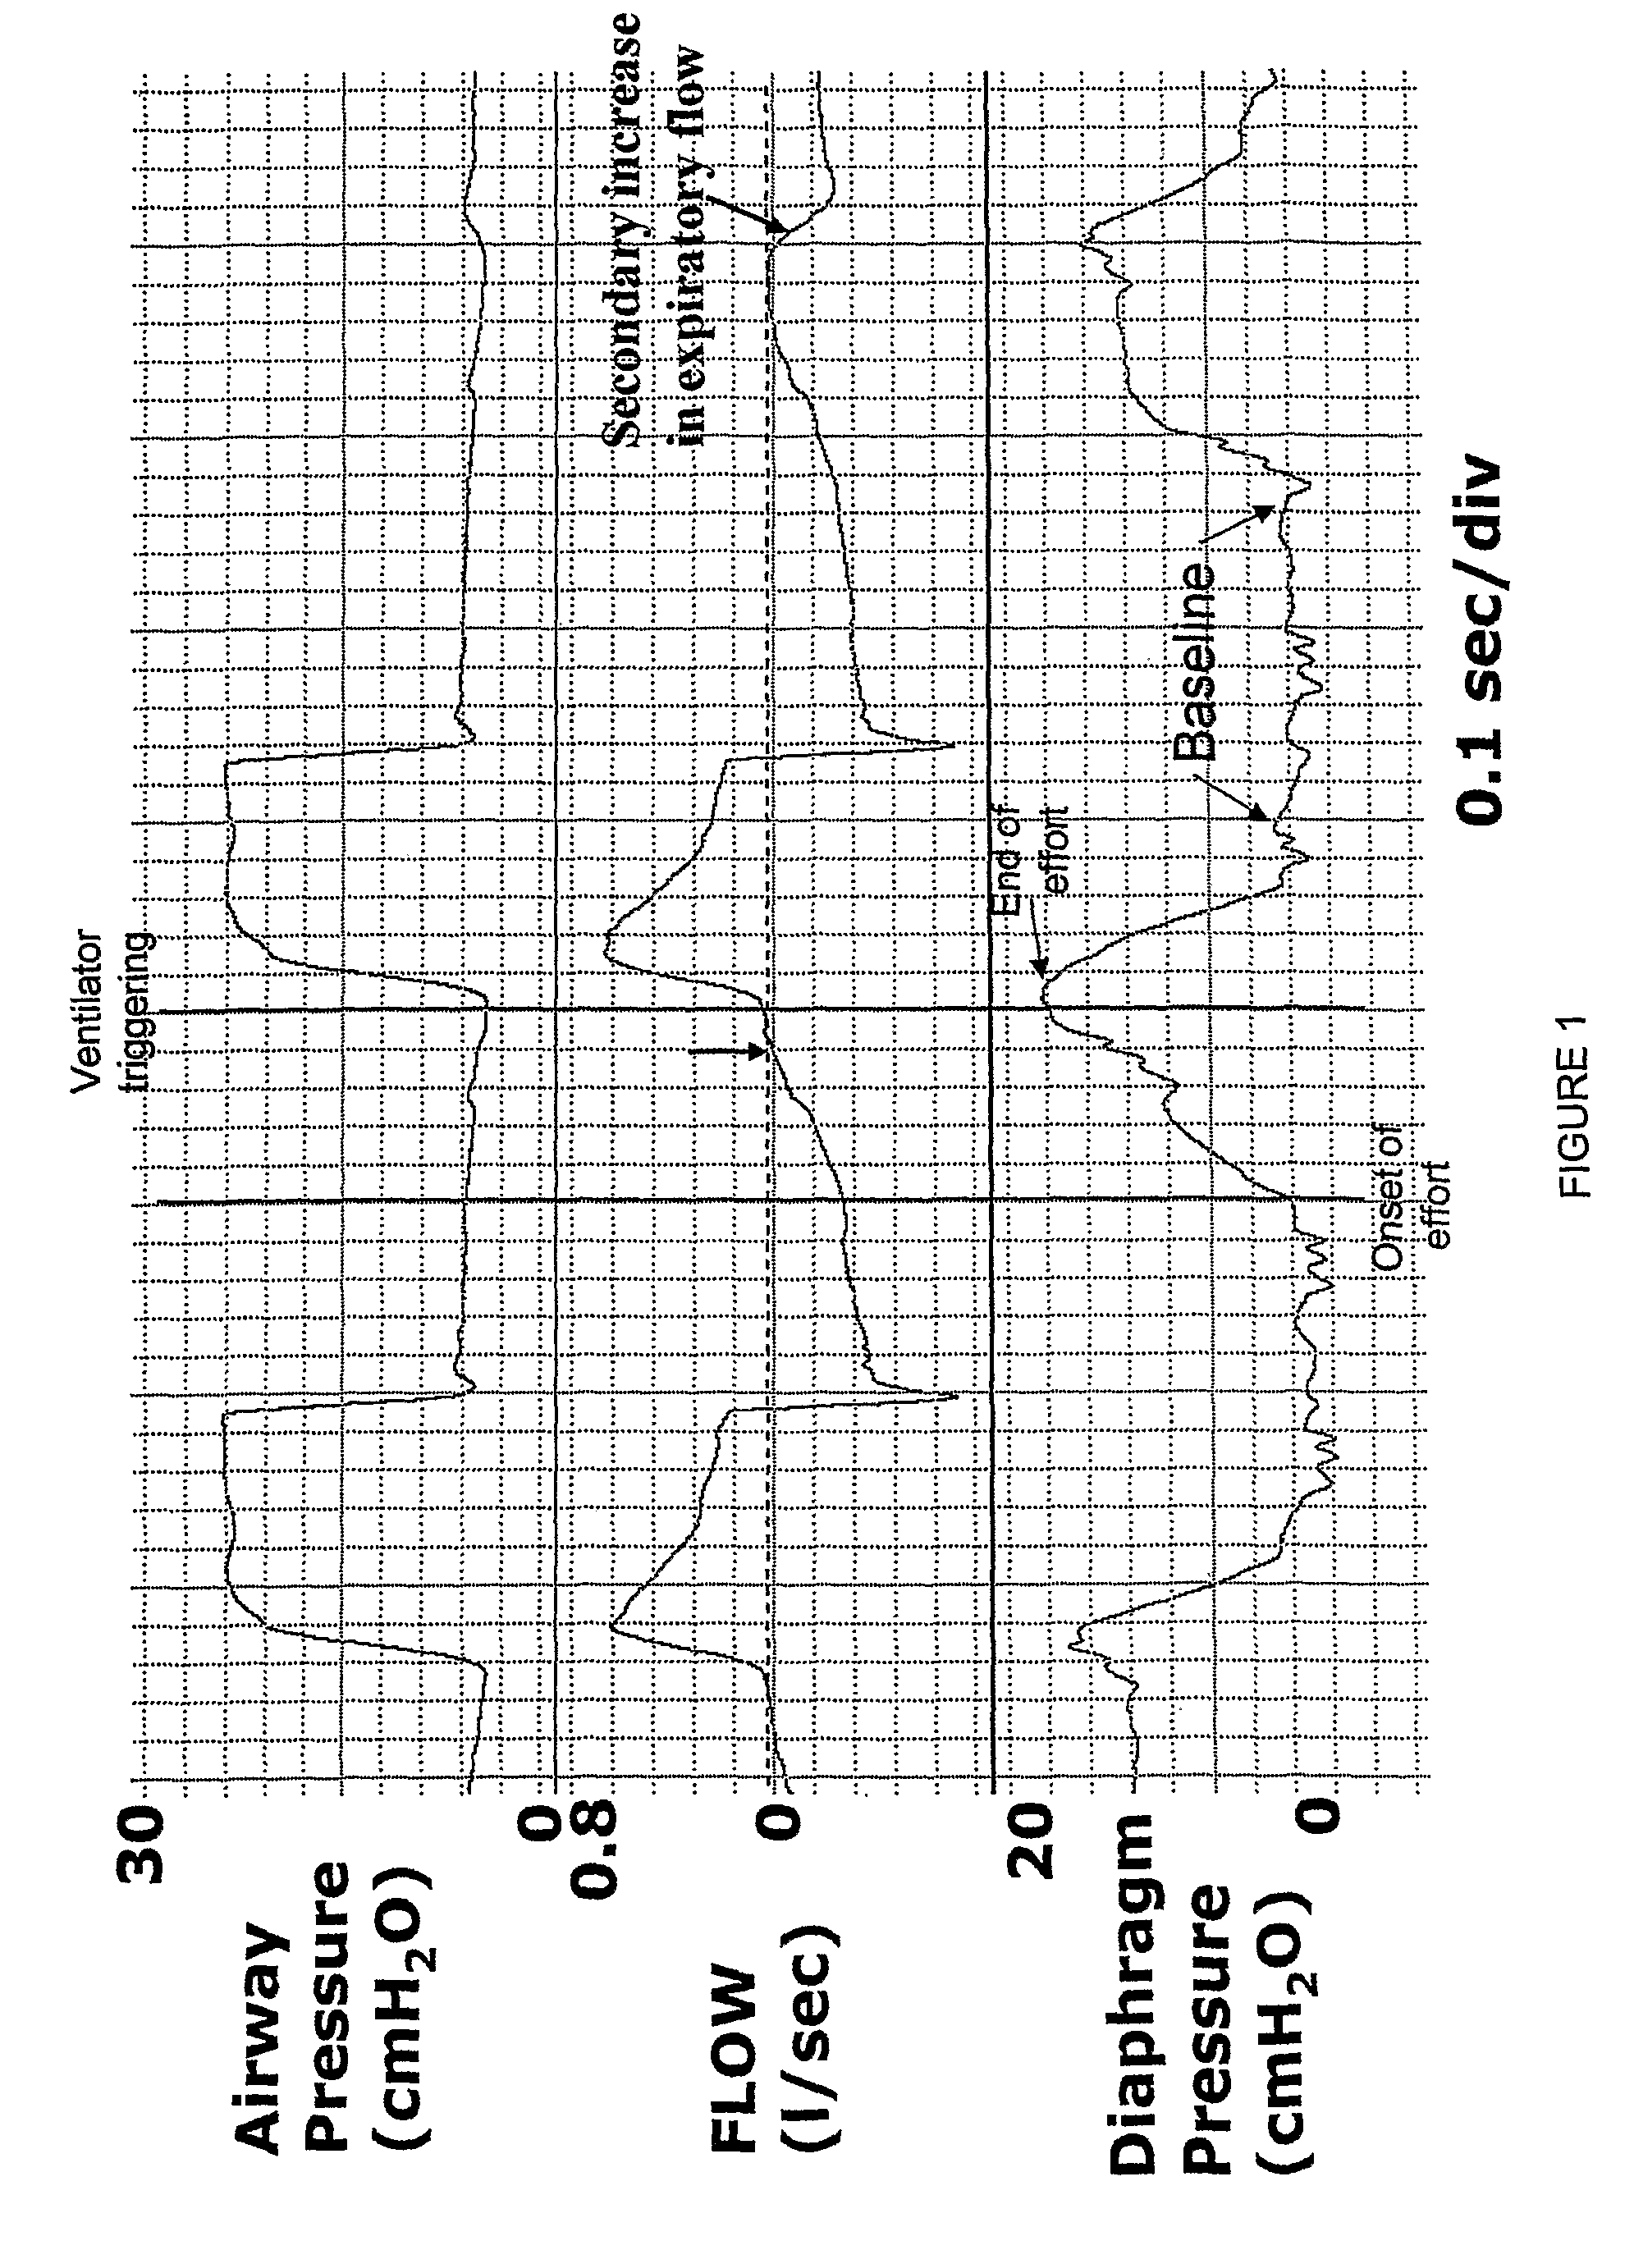 Method and device for generating of a signal that reflects respiratory efforts in patients on ventilatory support